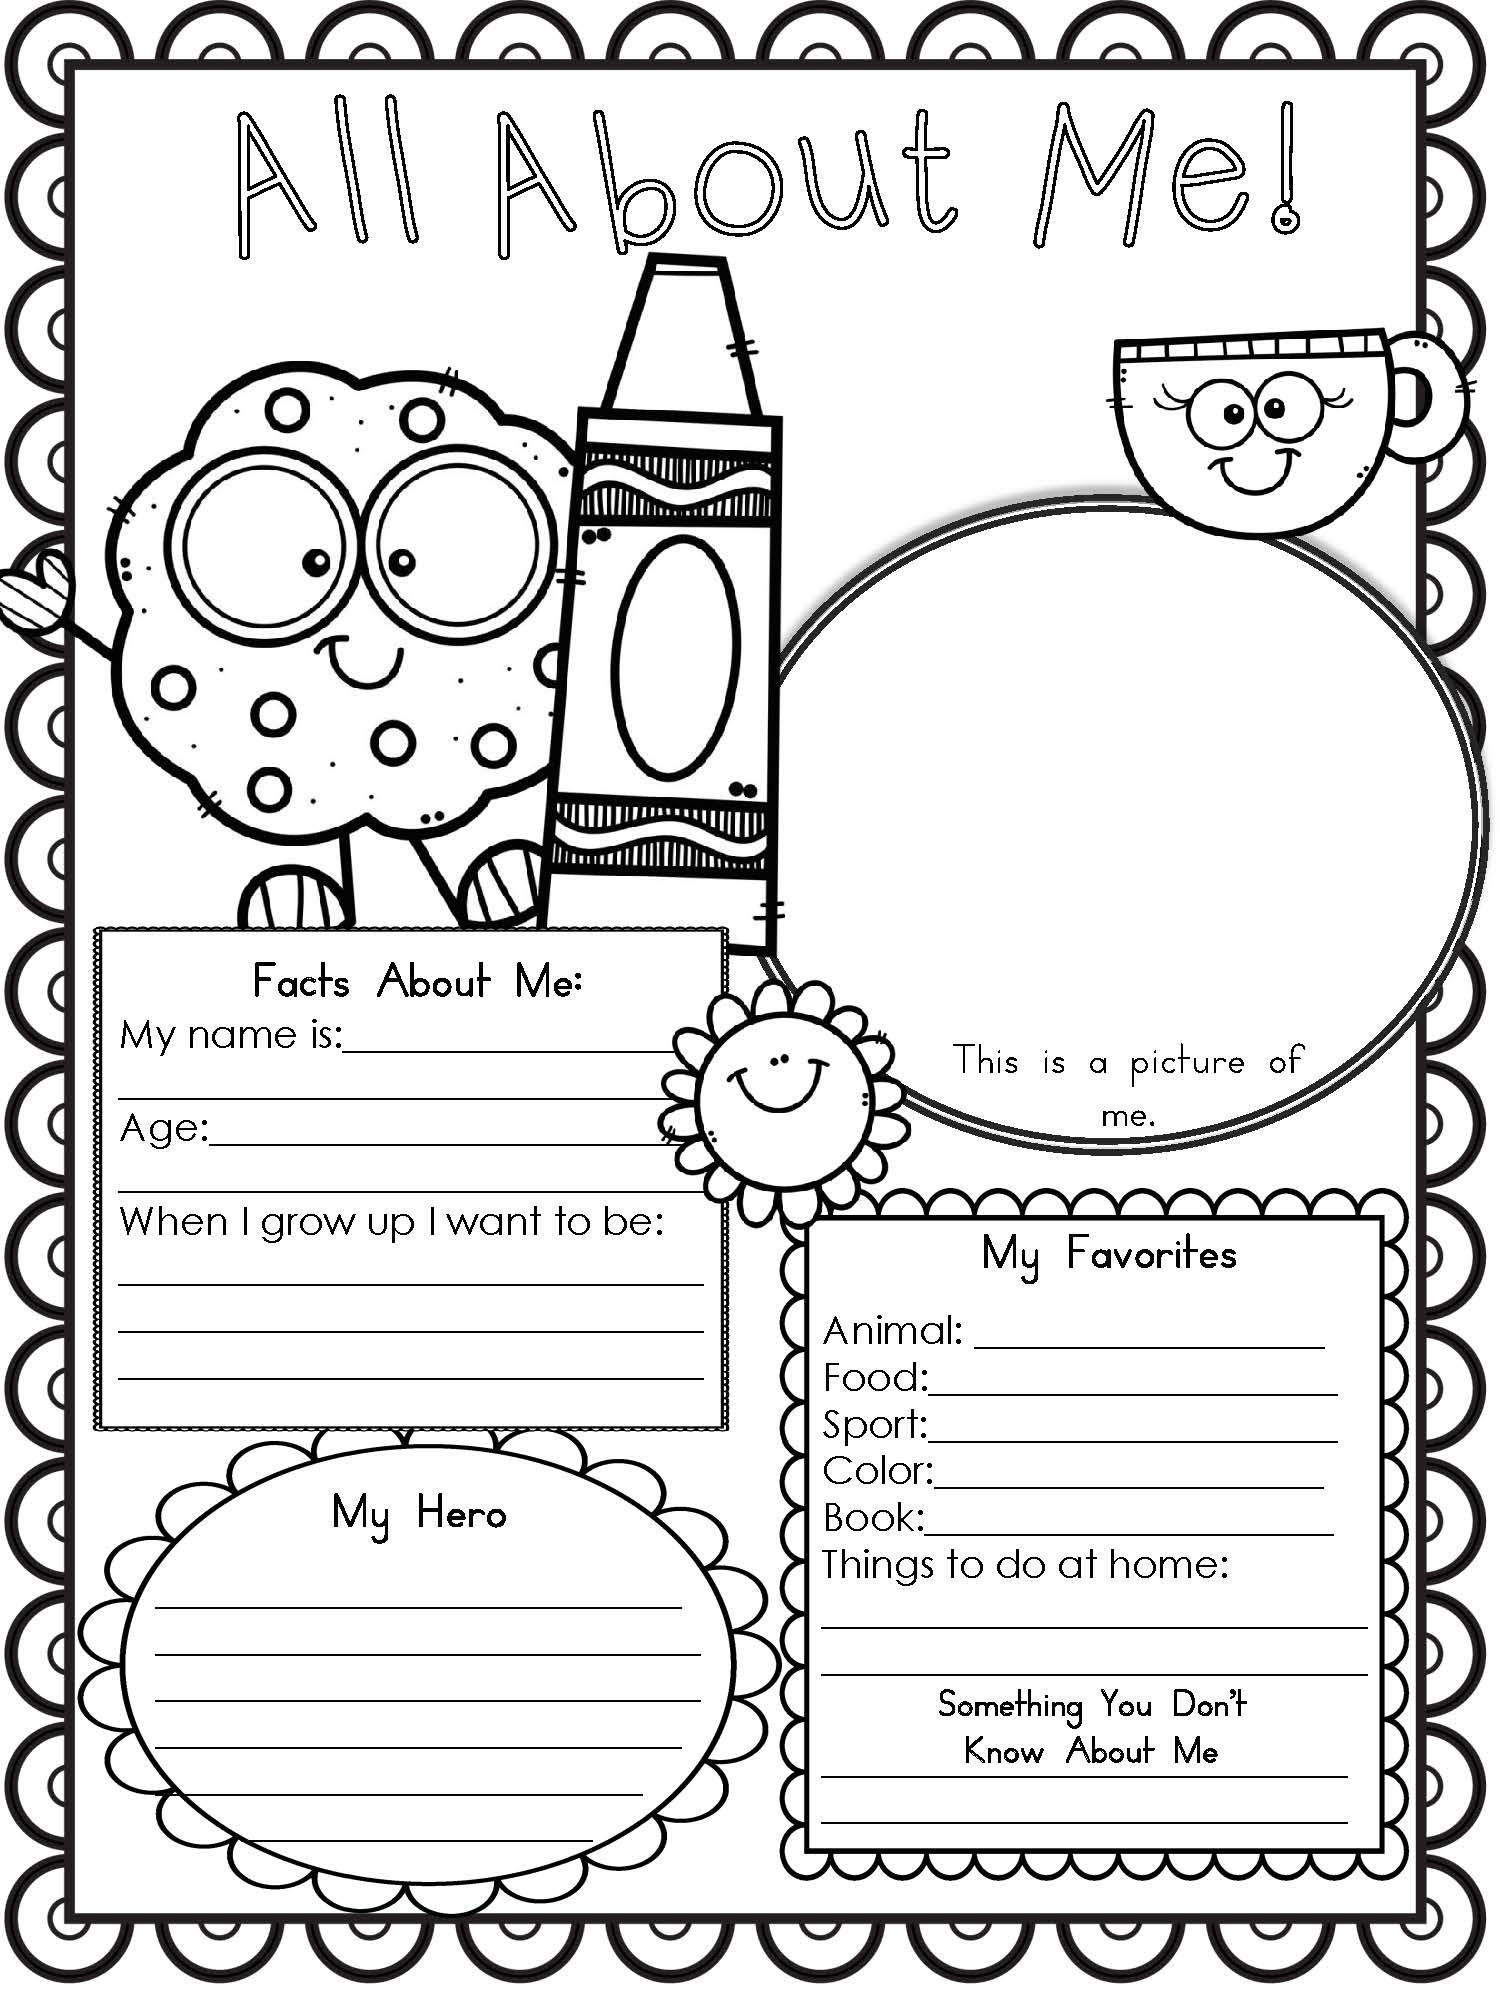 All About Me Printable Worksheet Free Printable All About Me Worksheet Modern Homeschool Family